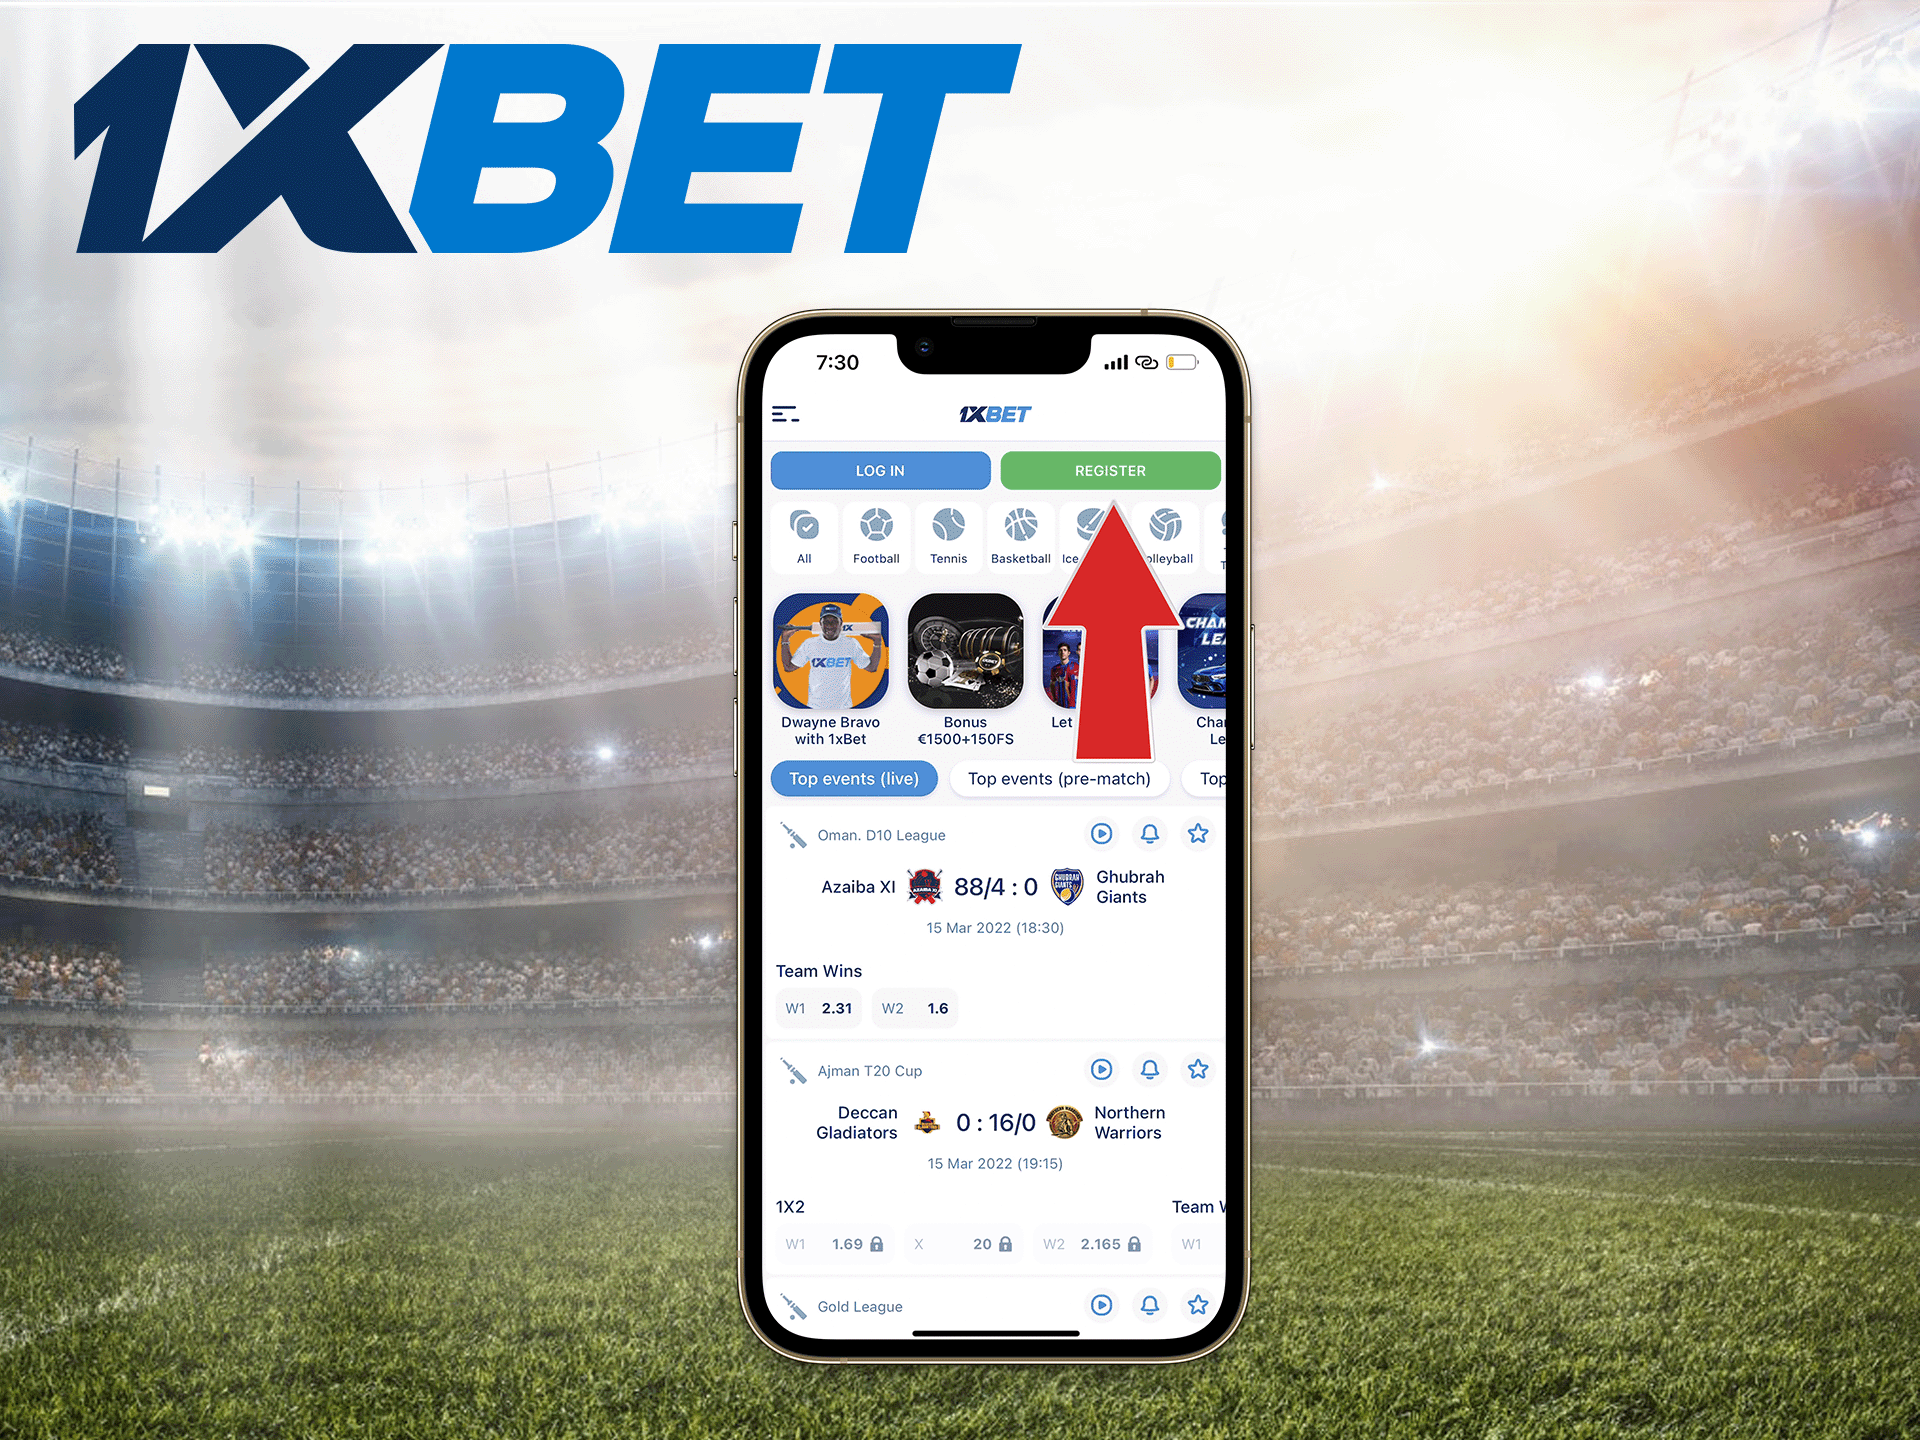 How You Can www.1xbet.com login Almost Instantly